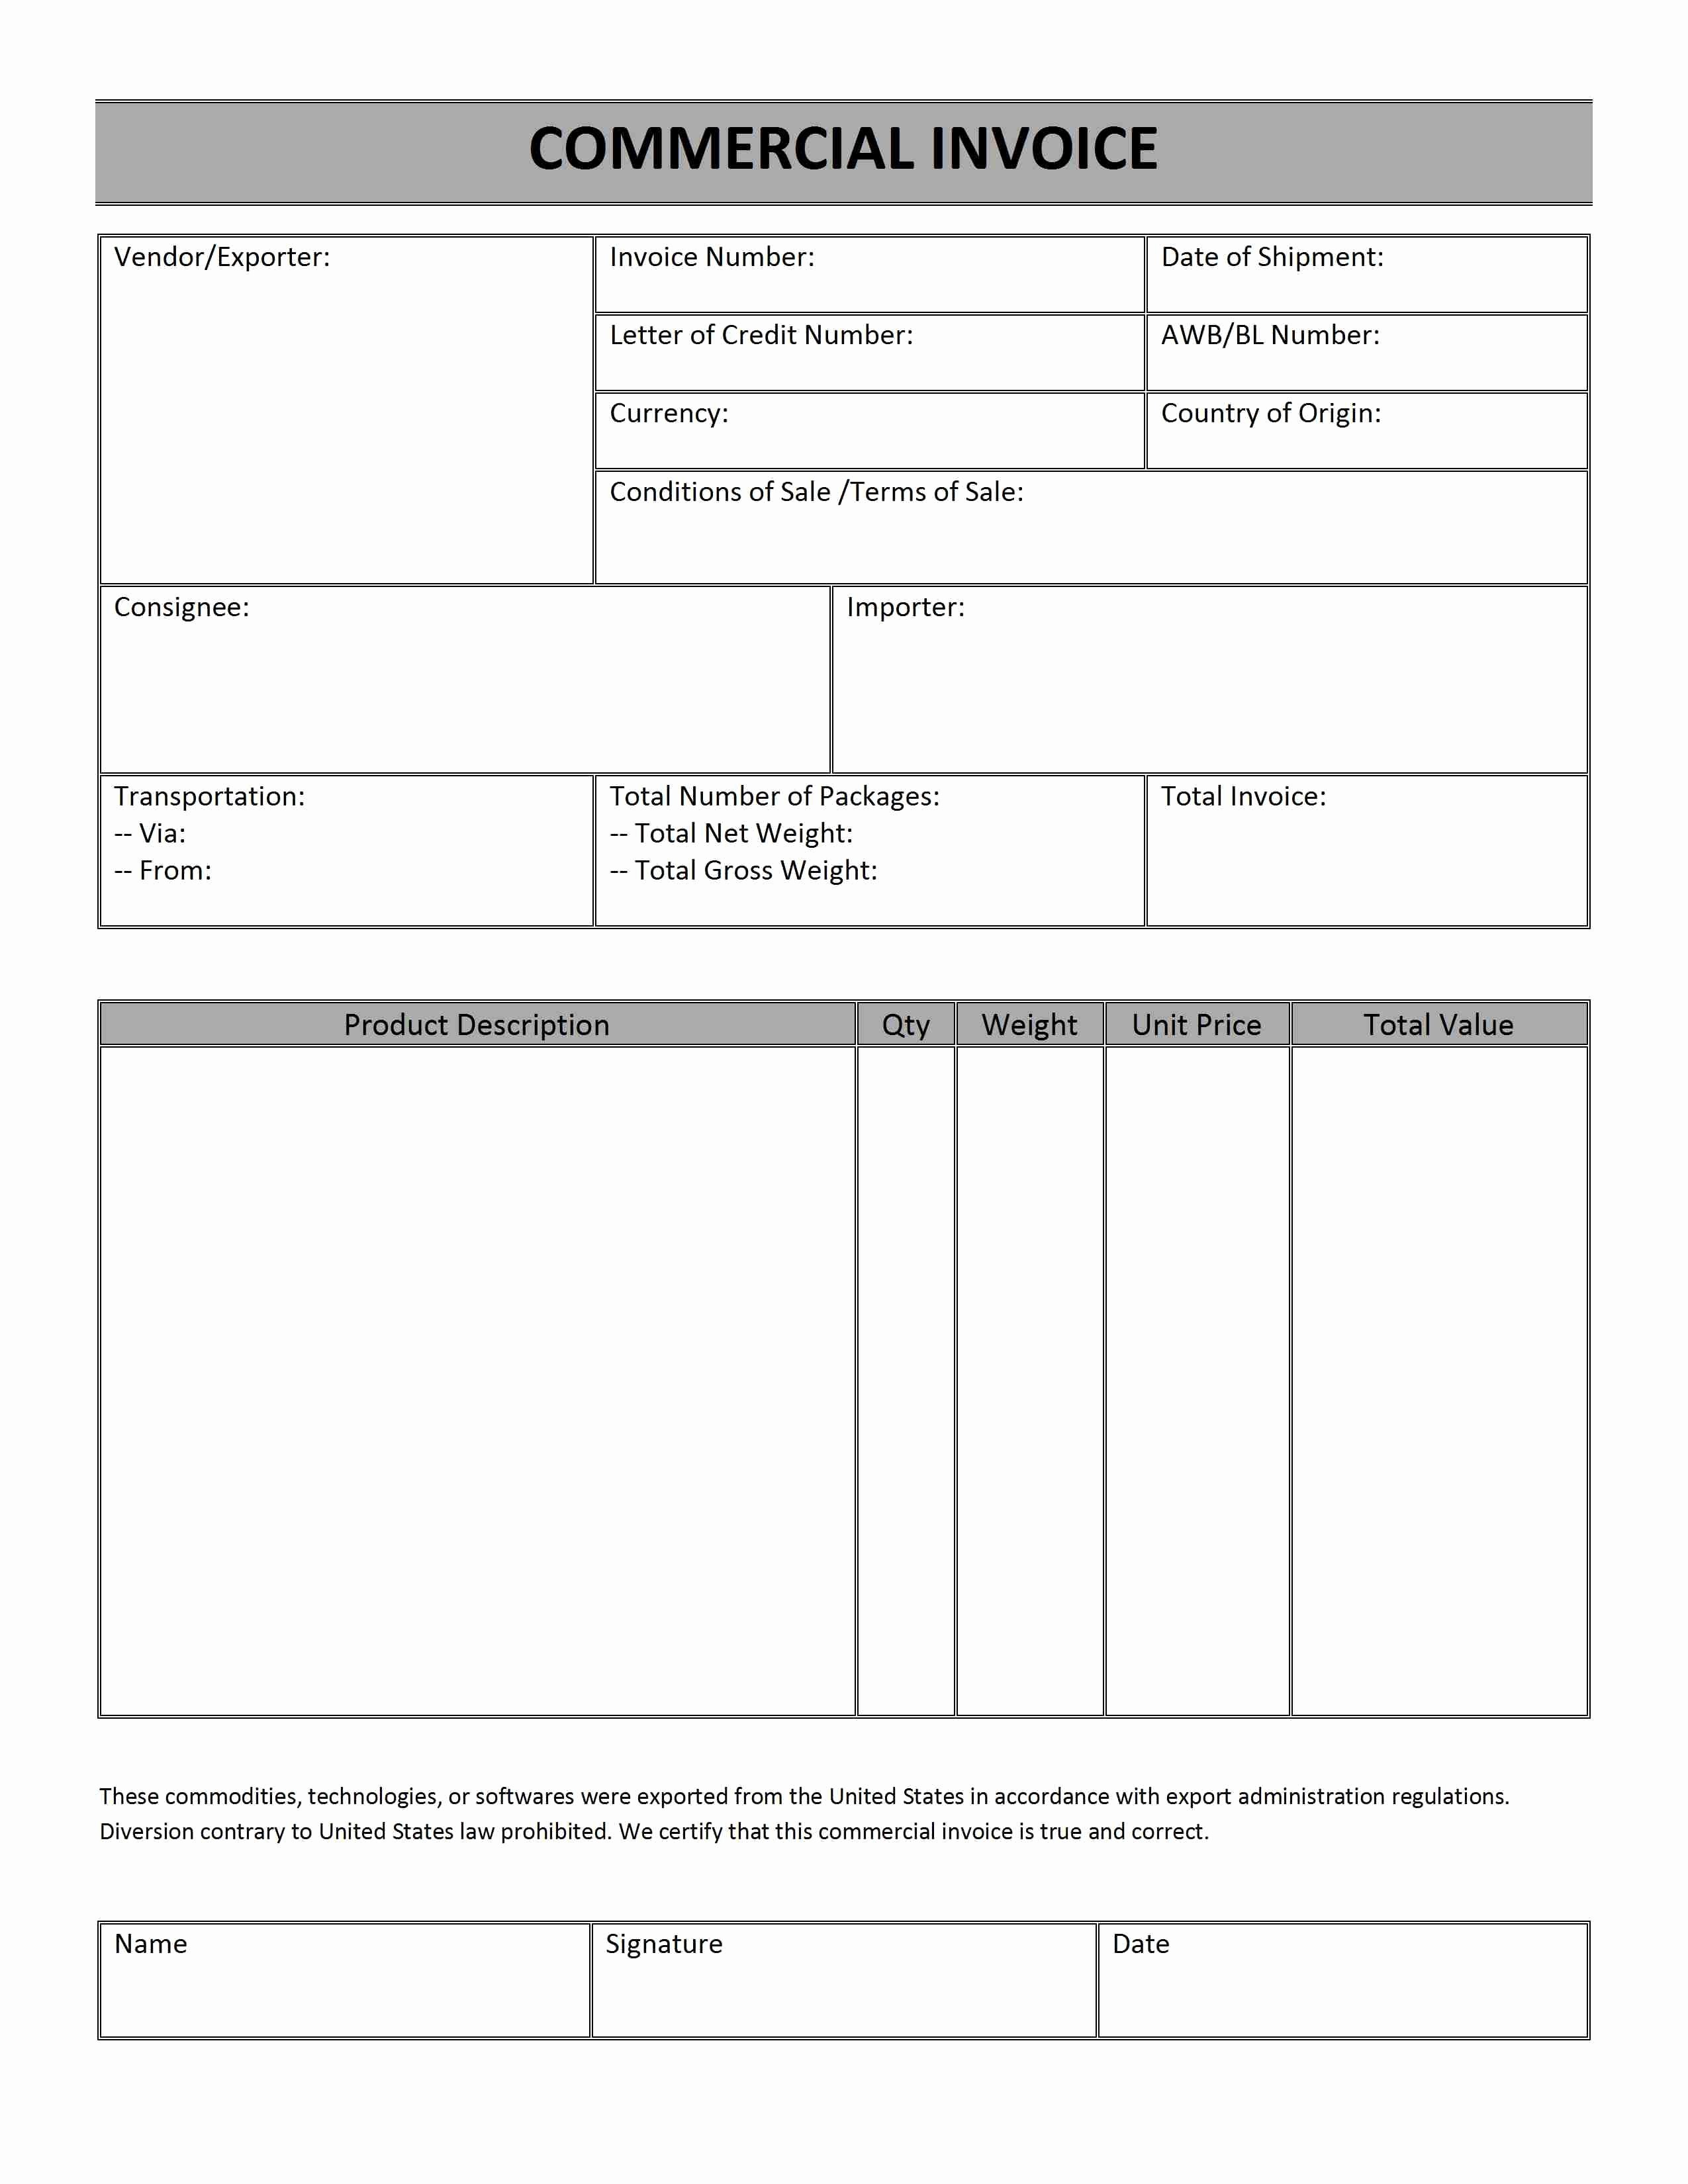 free invoice format in word inspirational mercial invoice word templates free word templates ms of free invoice format in word